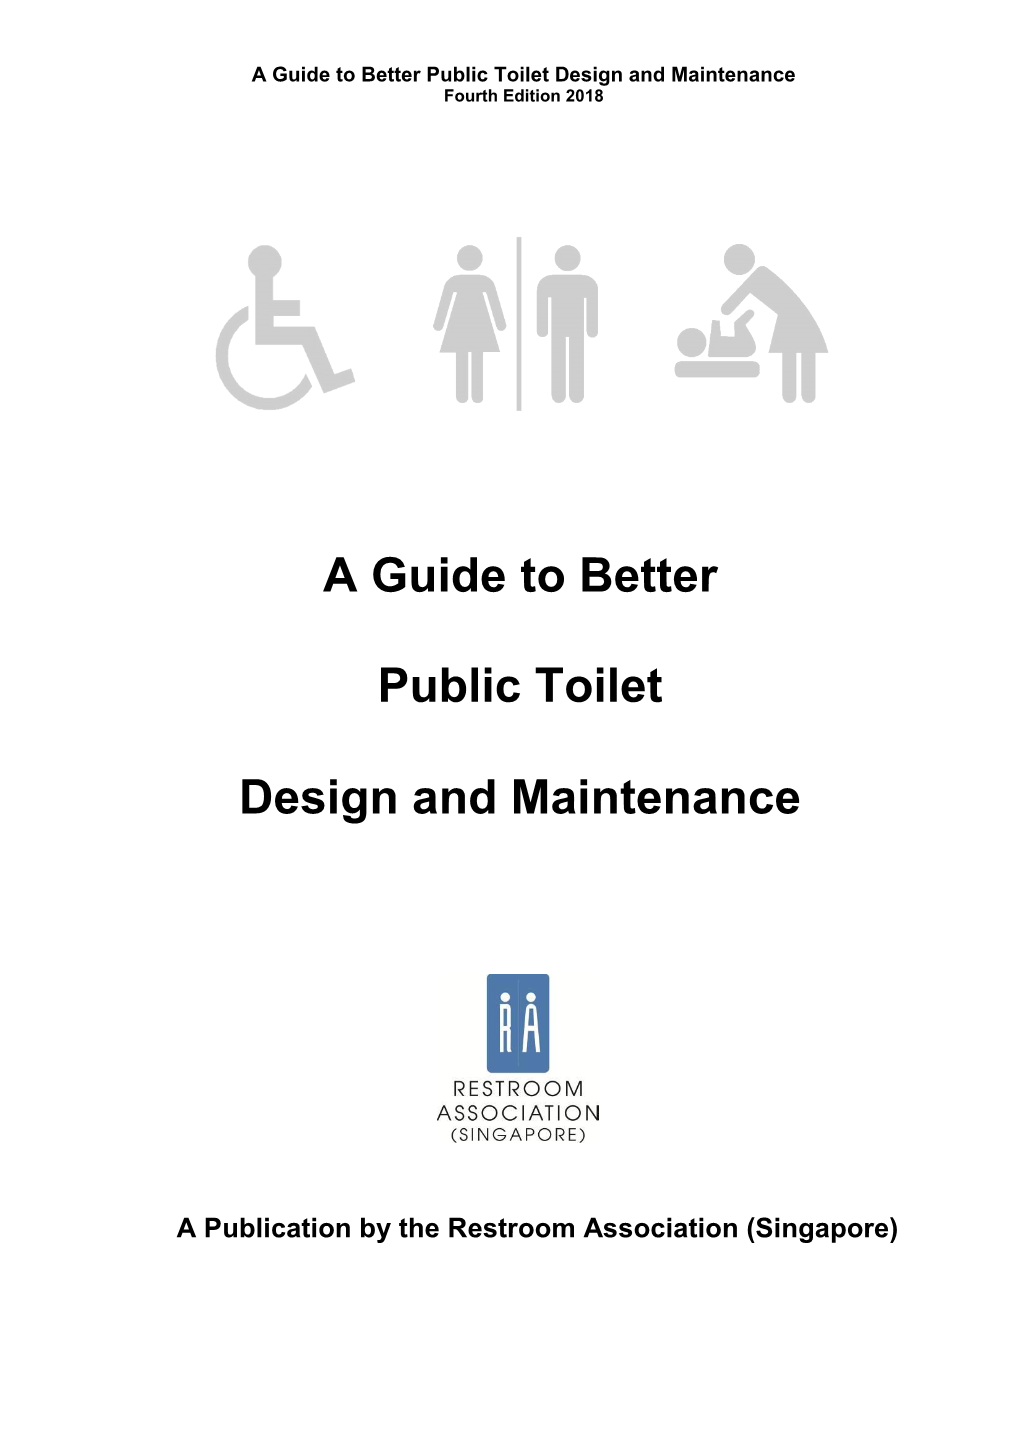 A Guide to Better Public Toilet Design and Maintenance Fourth Edition 2018